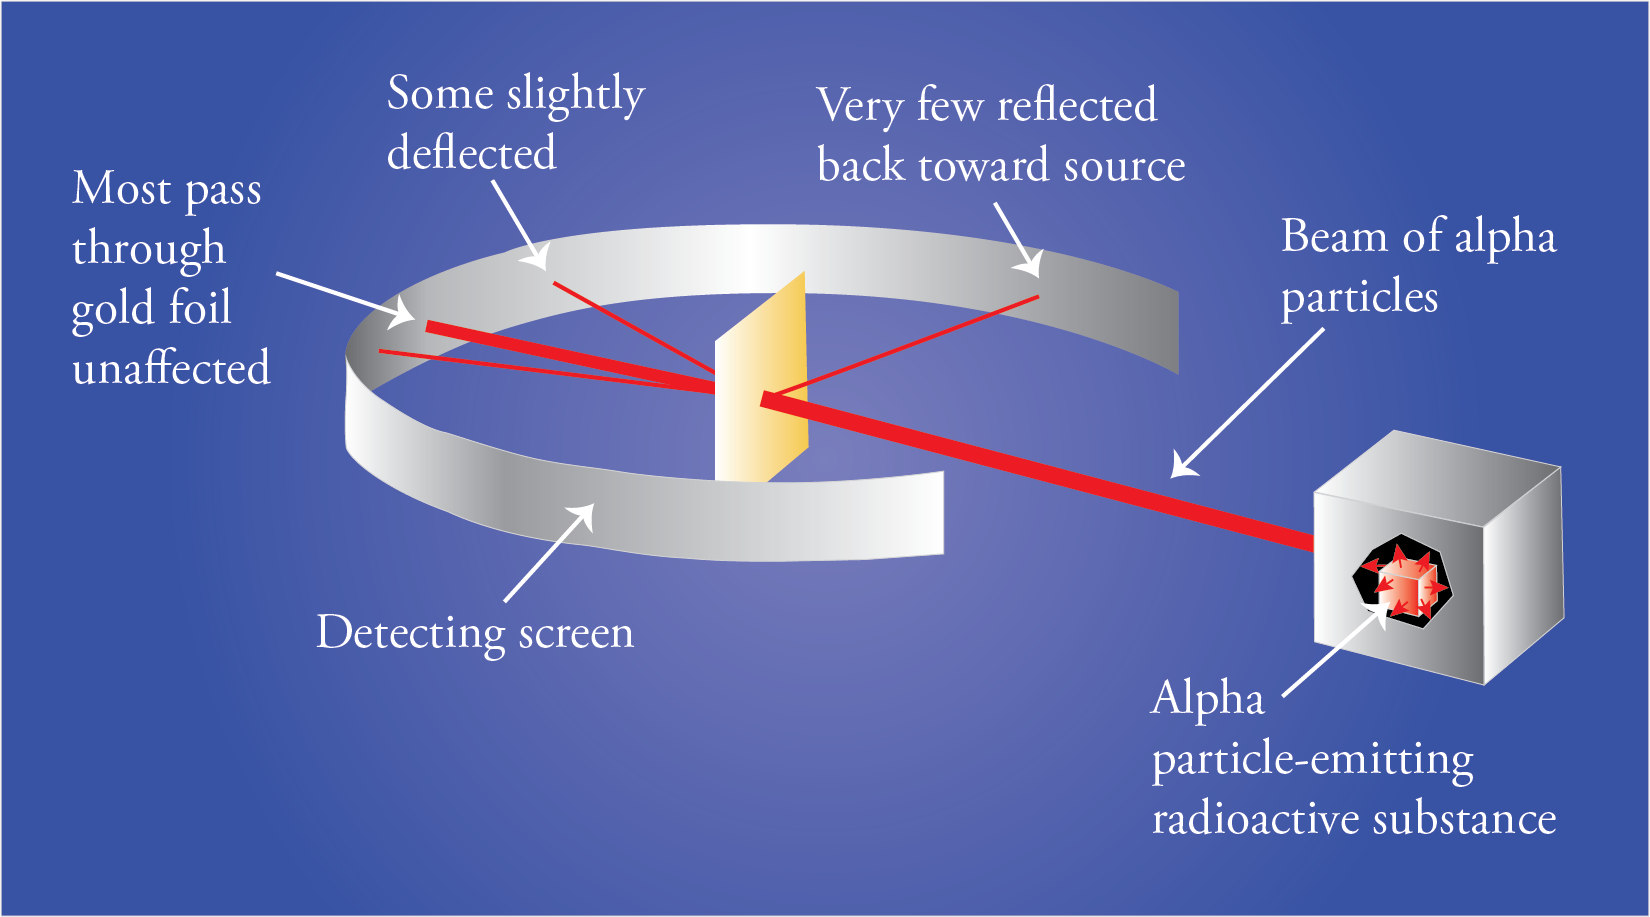 An image of Rutherfford's gold foil experiment.